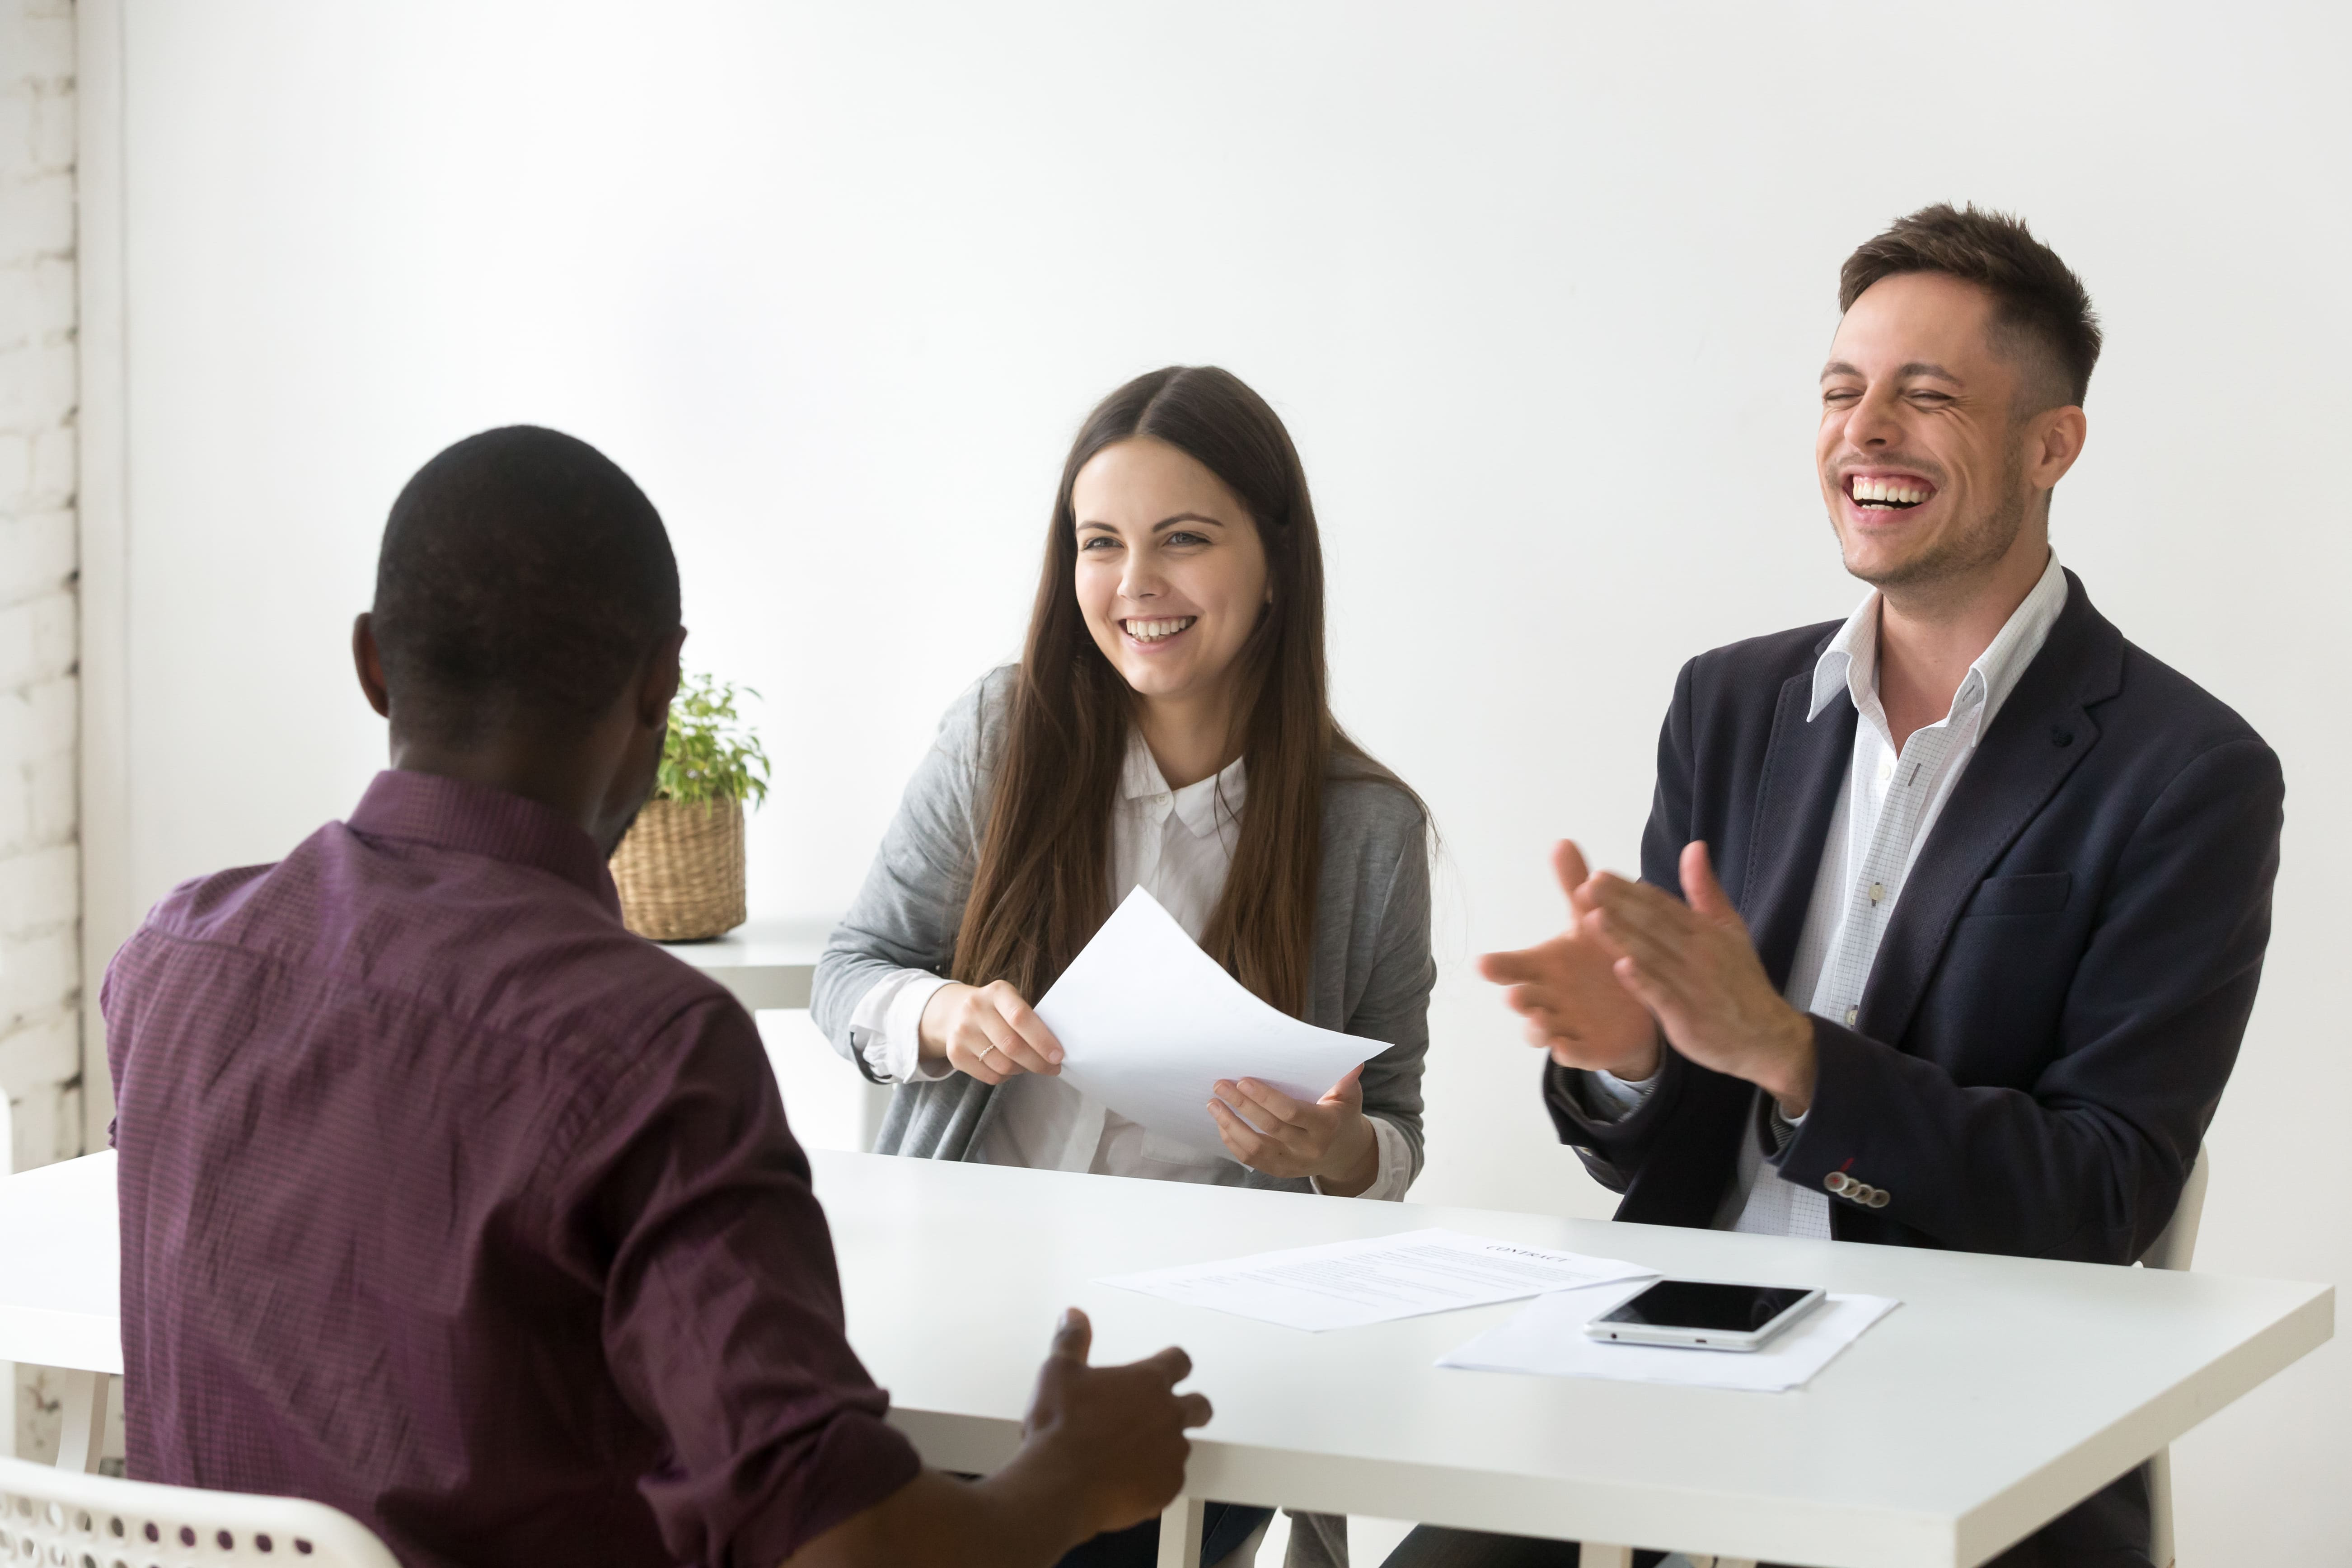 10 Effective Recruitment Tips to Get the Best Employees: Building a Stellar Team